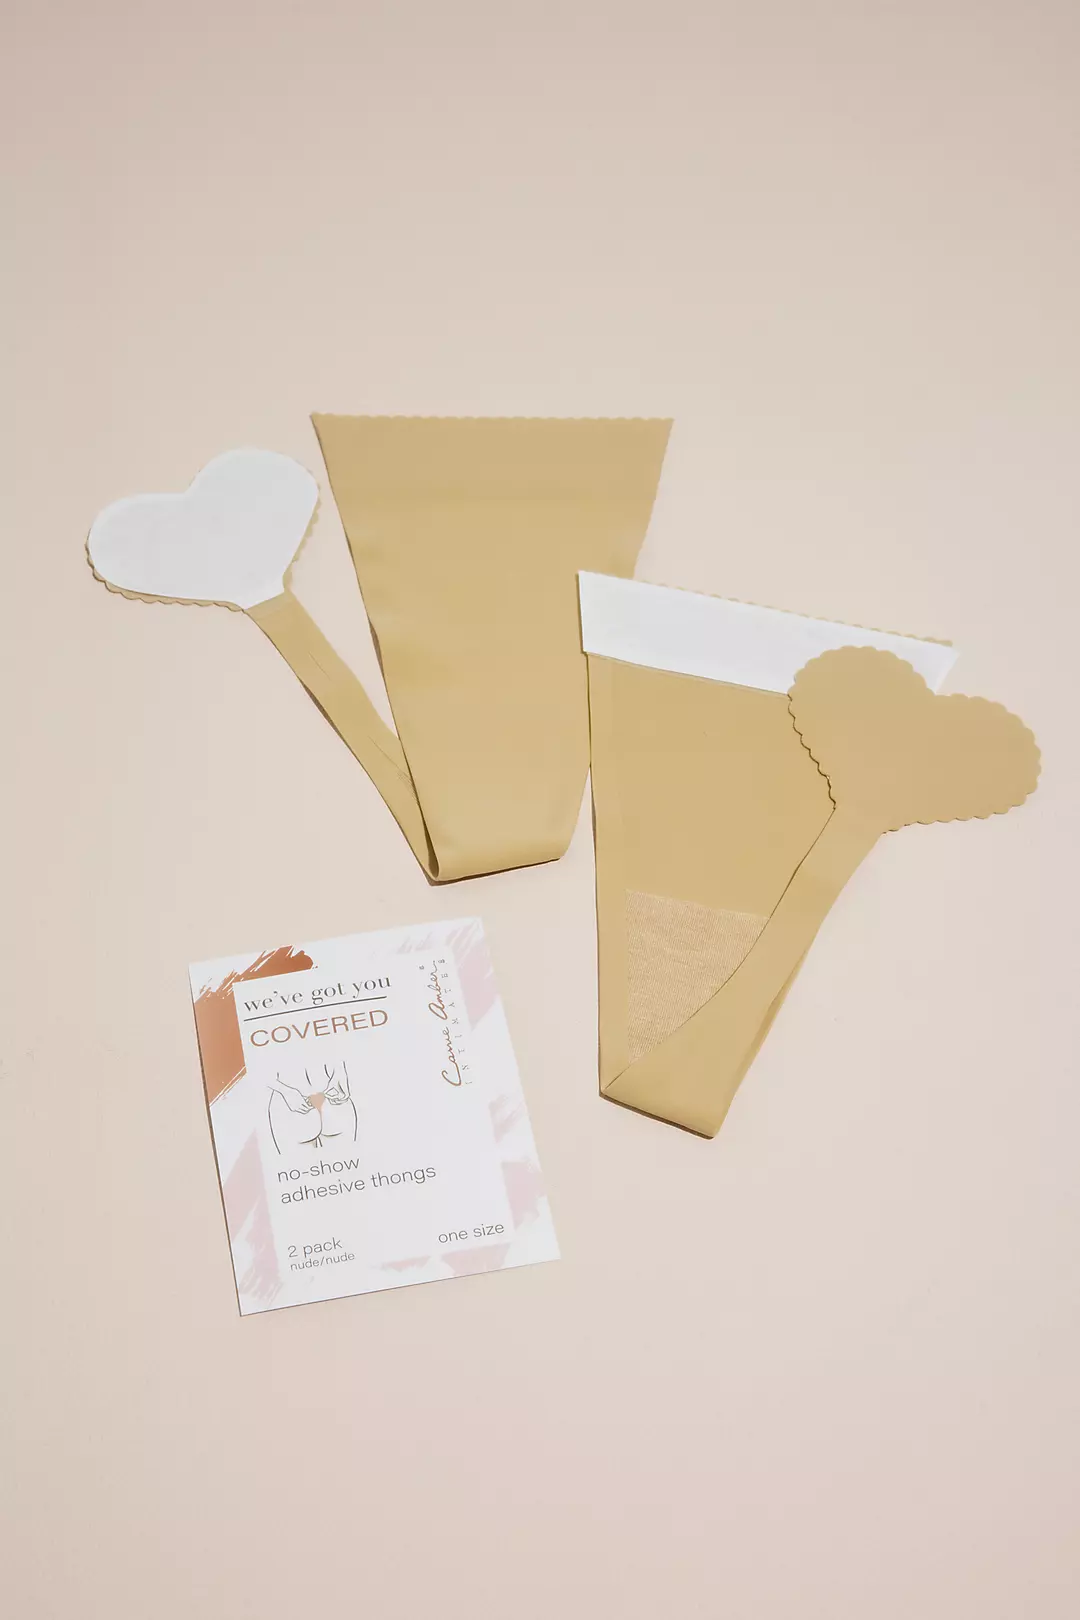 No-Show Adhesive Thongs Two Pack Image